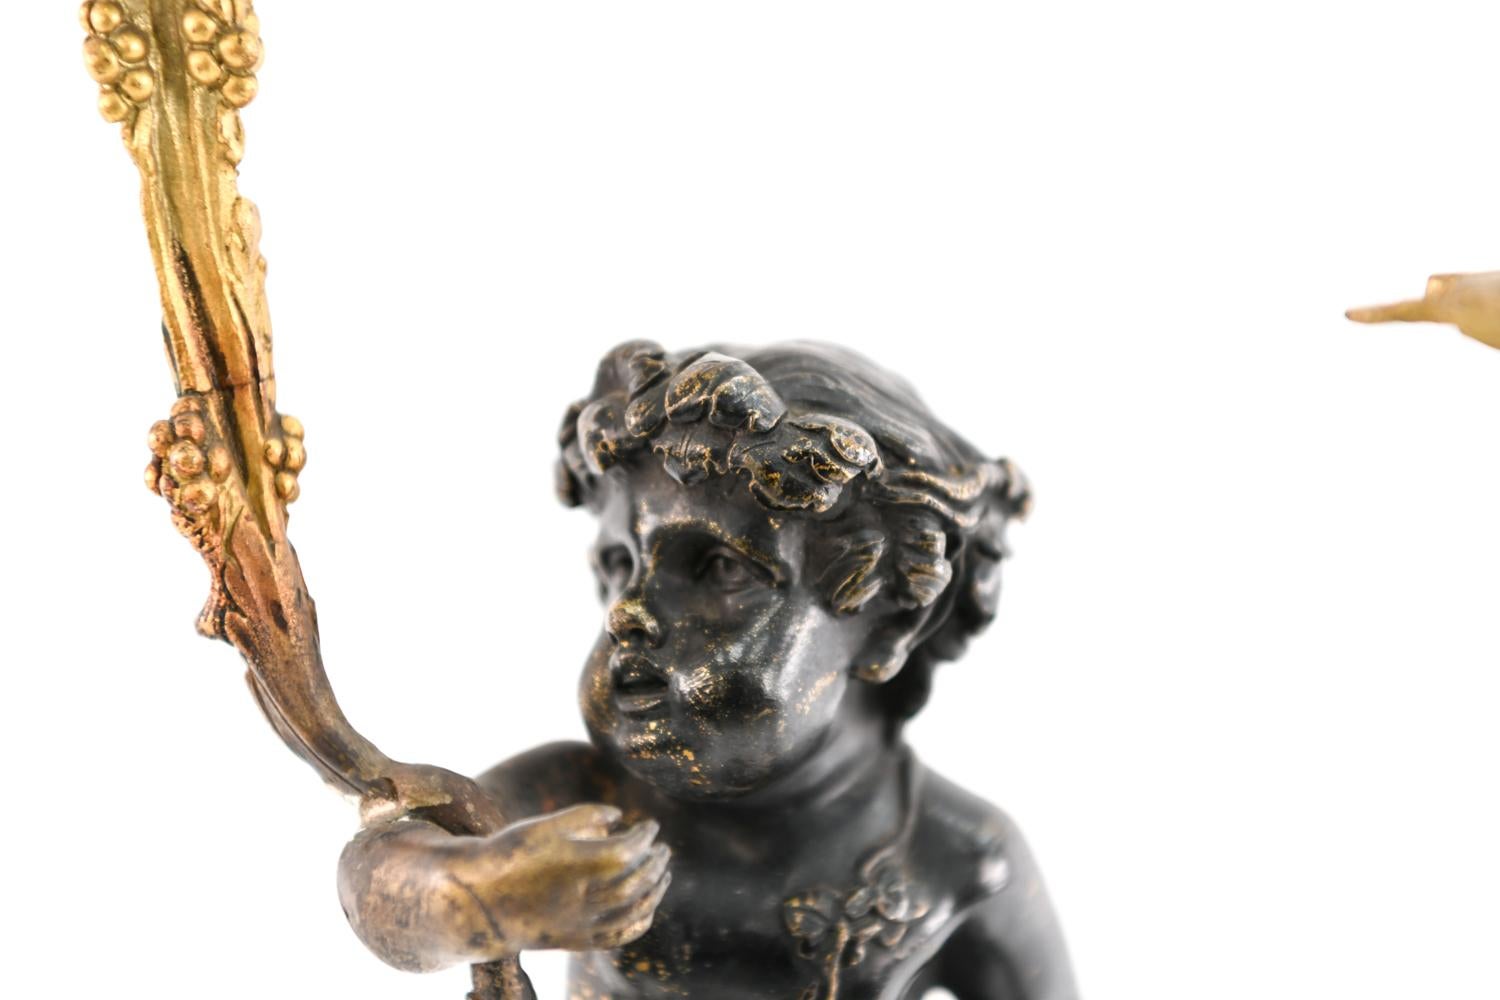 A stunning 19th century French bronze candelabra in the form of a satyr.